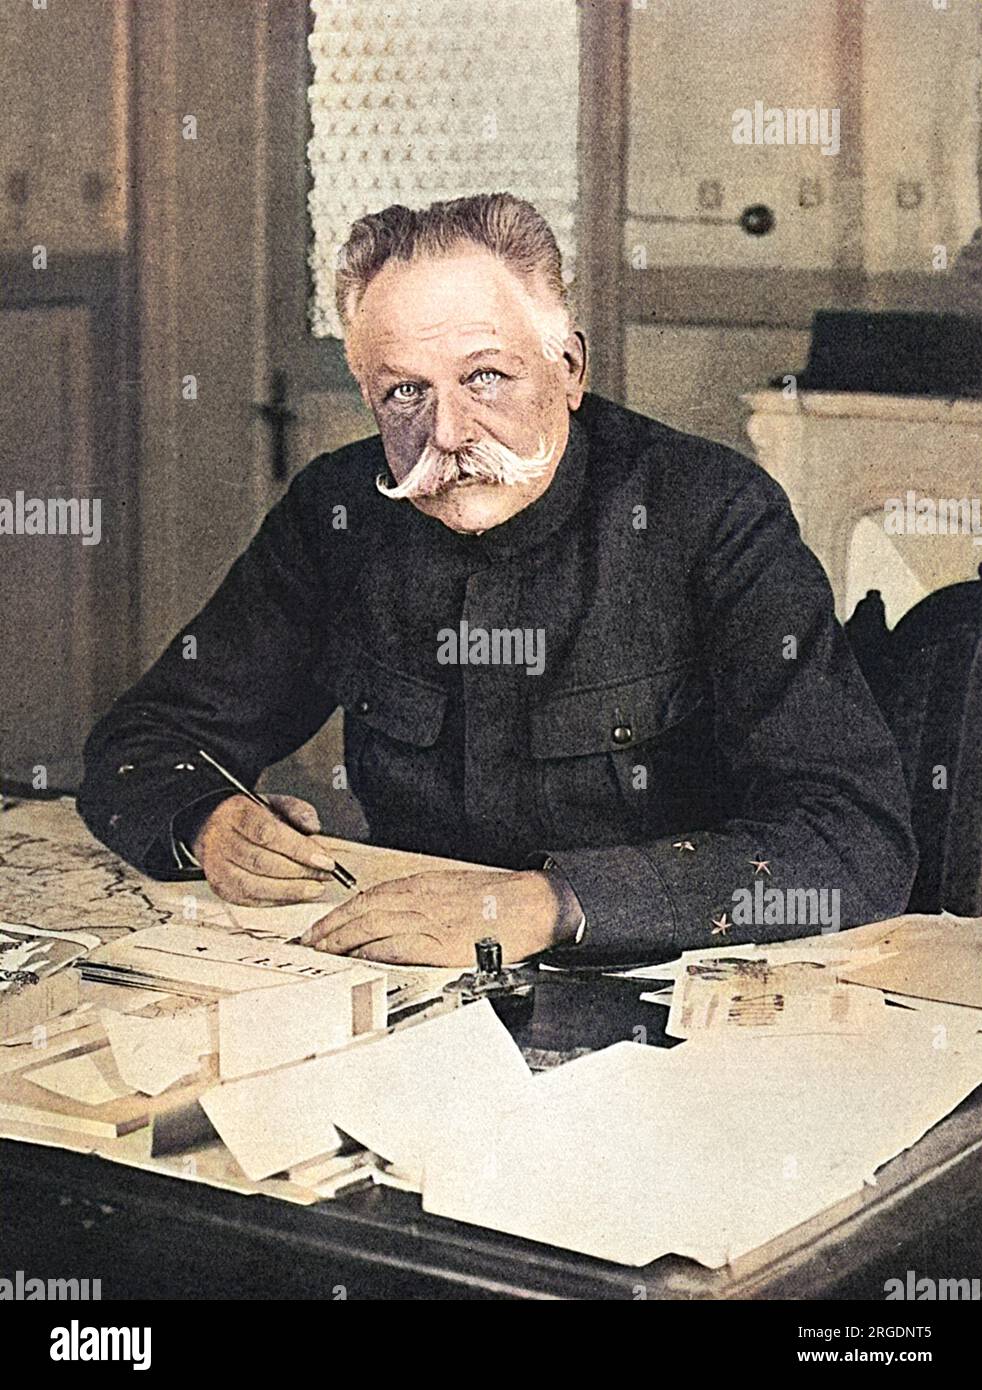 General MAURICE SARRAIL (1856 - 1929) commander of the third army at the battle of the Marne (1914) then of French forces in Gallipoli and later Salonika (1915-17). Stock Photo